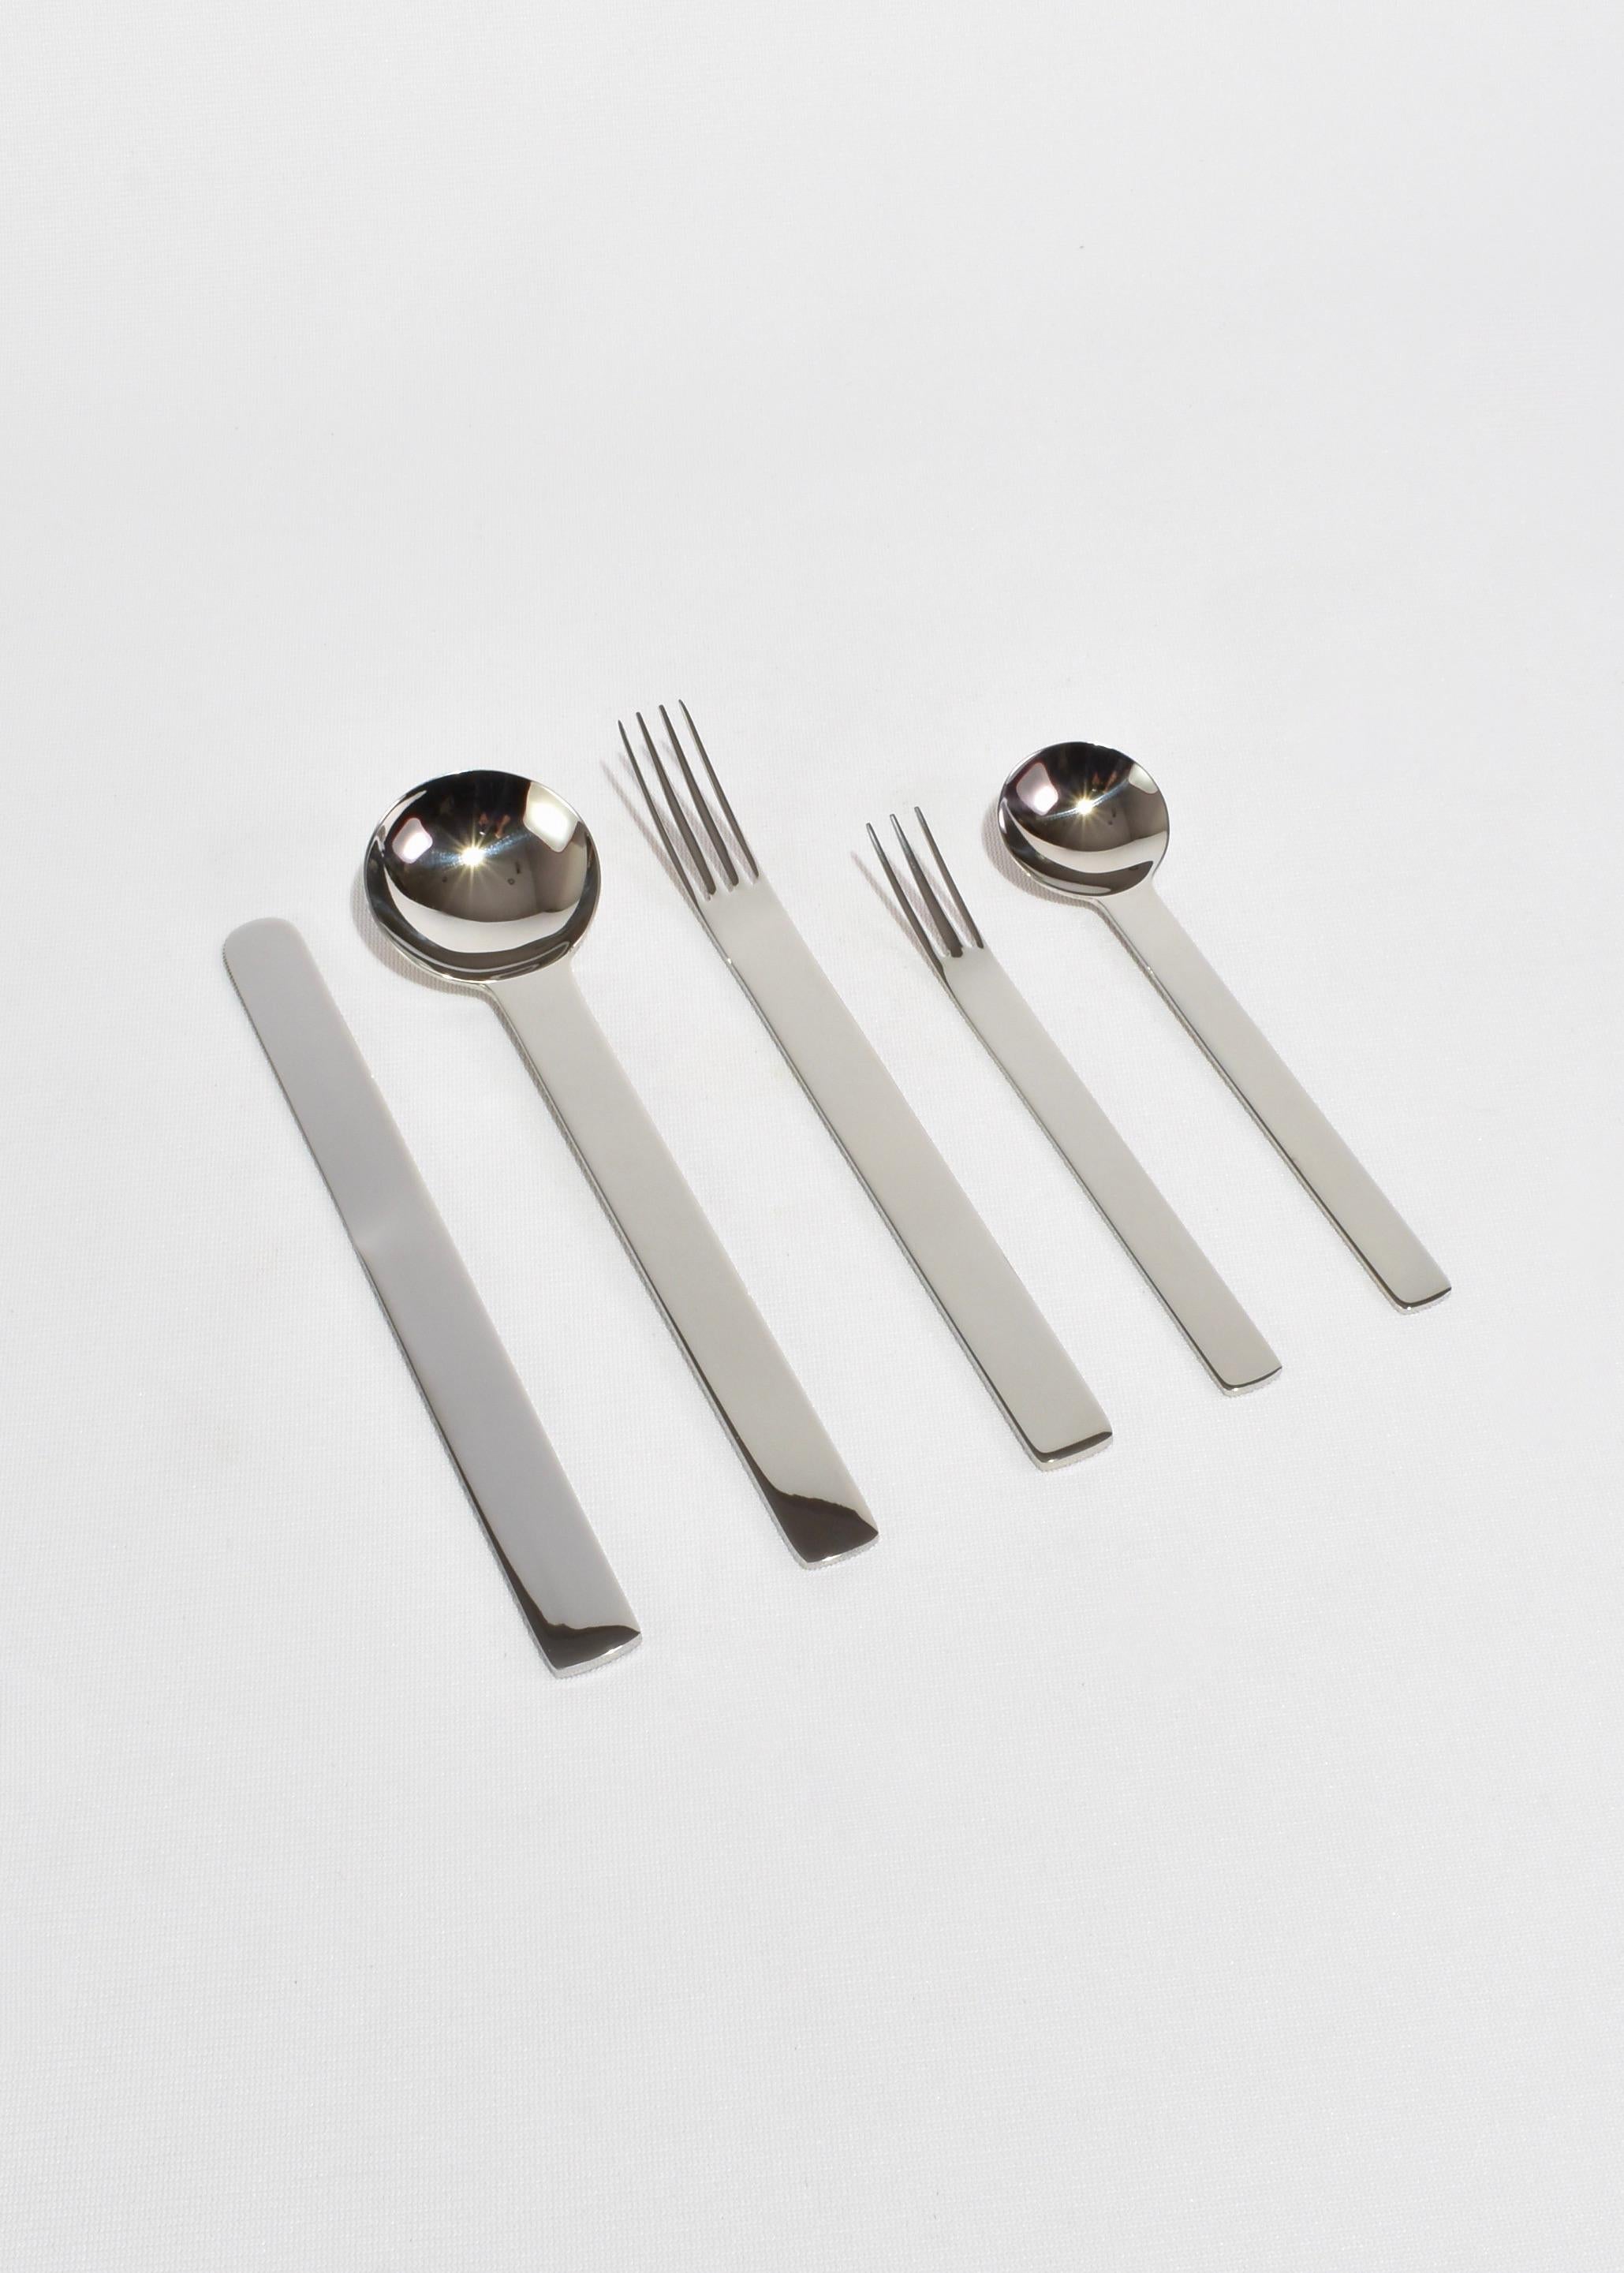 5-piece boxed cutlery set 'TI-1' by Japense designer Takenobu Igarashi, ca. 1990. Made from lightweight 18/10 stainless steel in a shiny finish, the series is finished by 40-50 production processes combining human hand and machinery. Each piece is